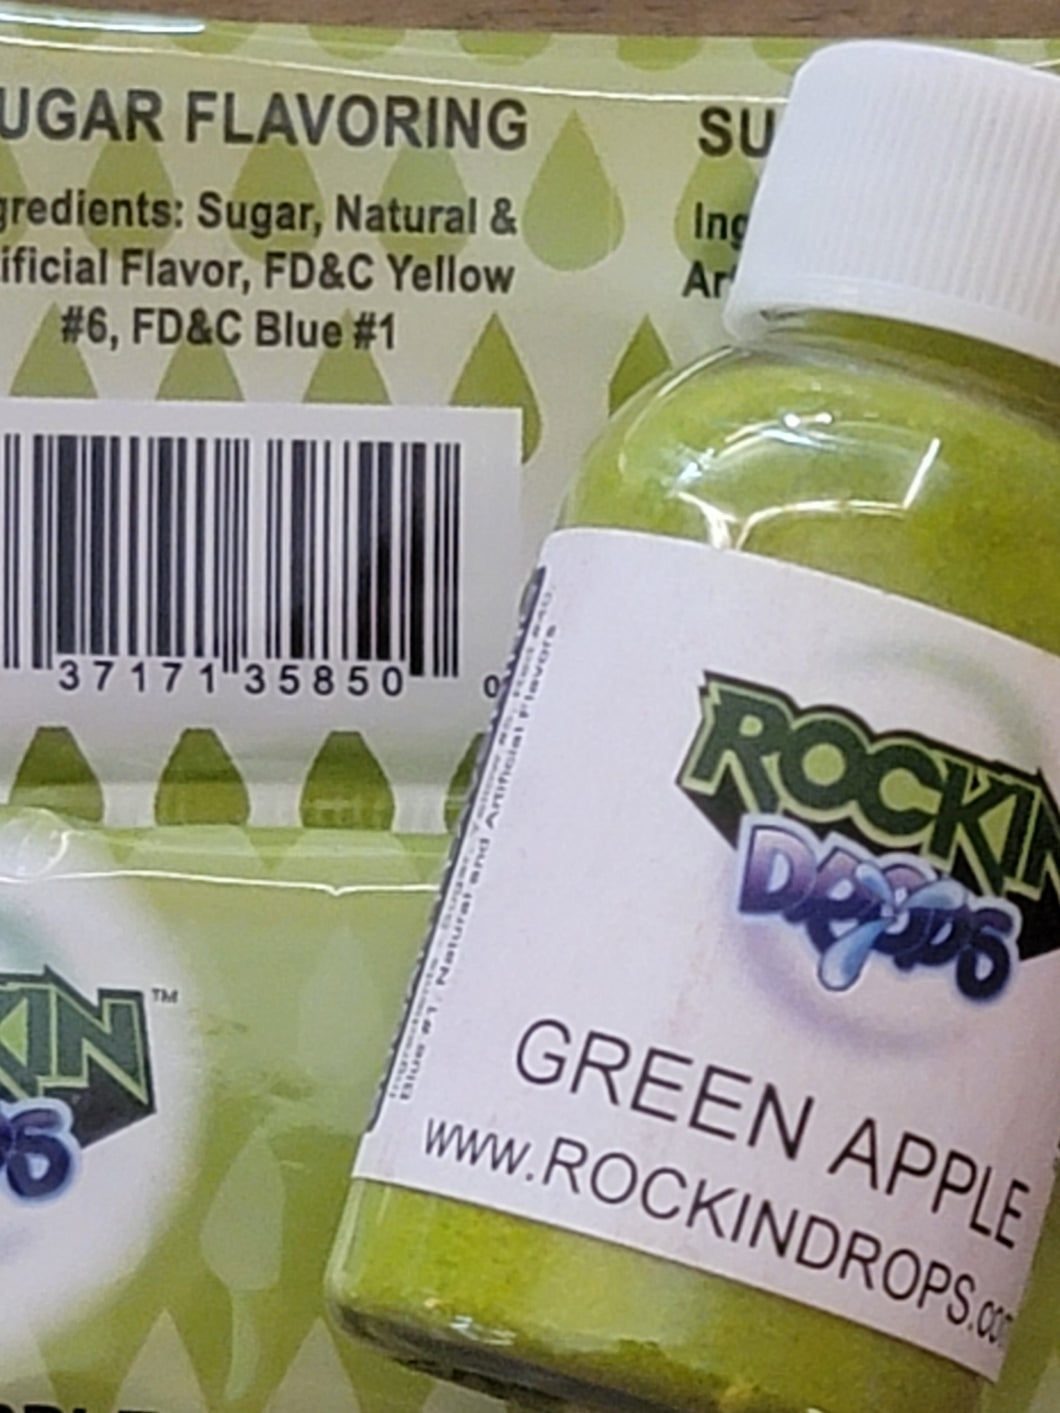 RockinDrops Concentrated Floss Sugar Flavoring - Green Apple